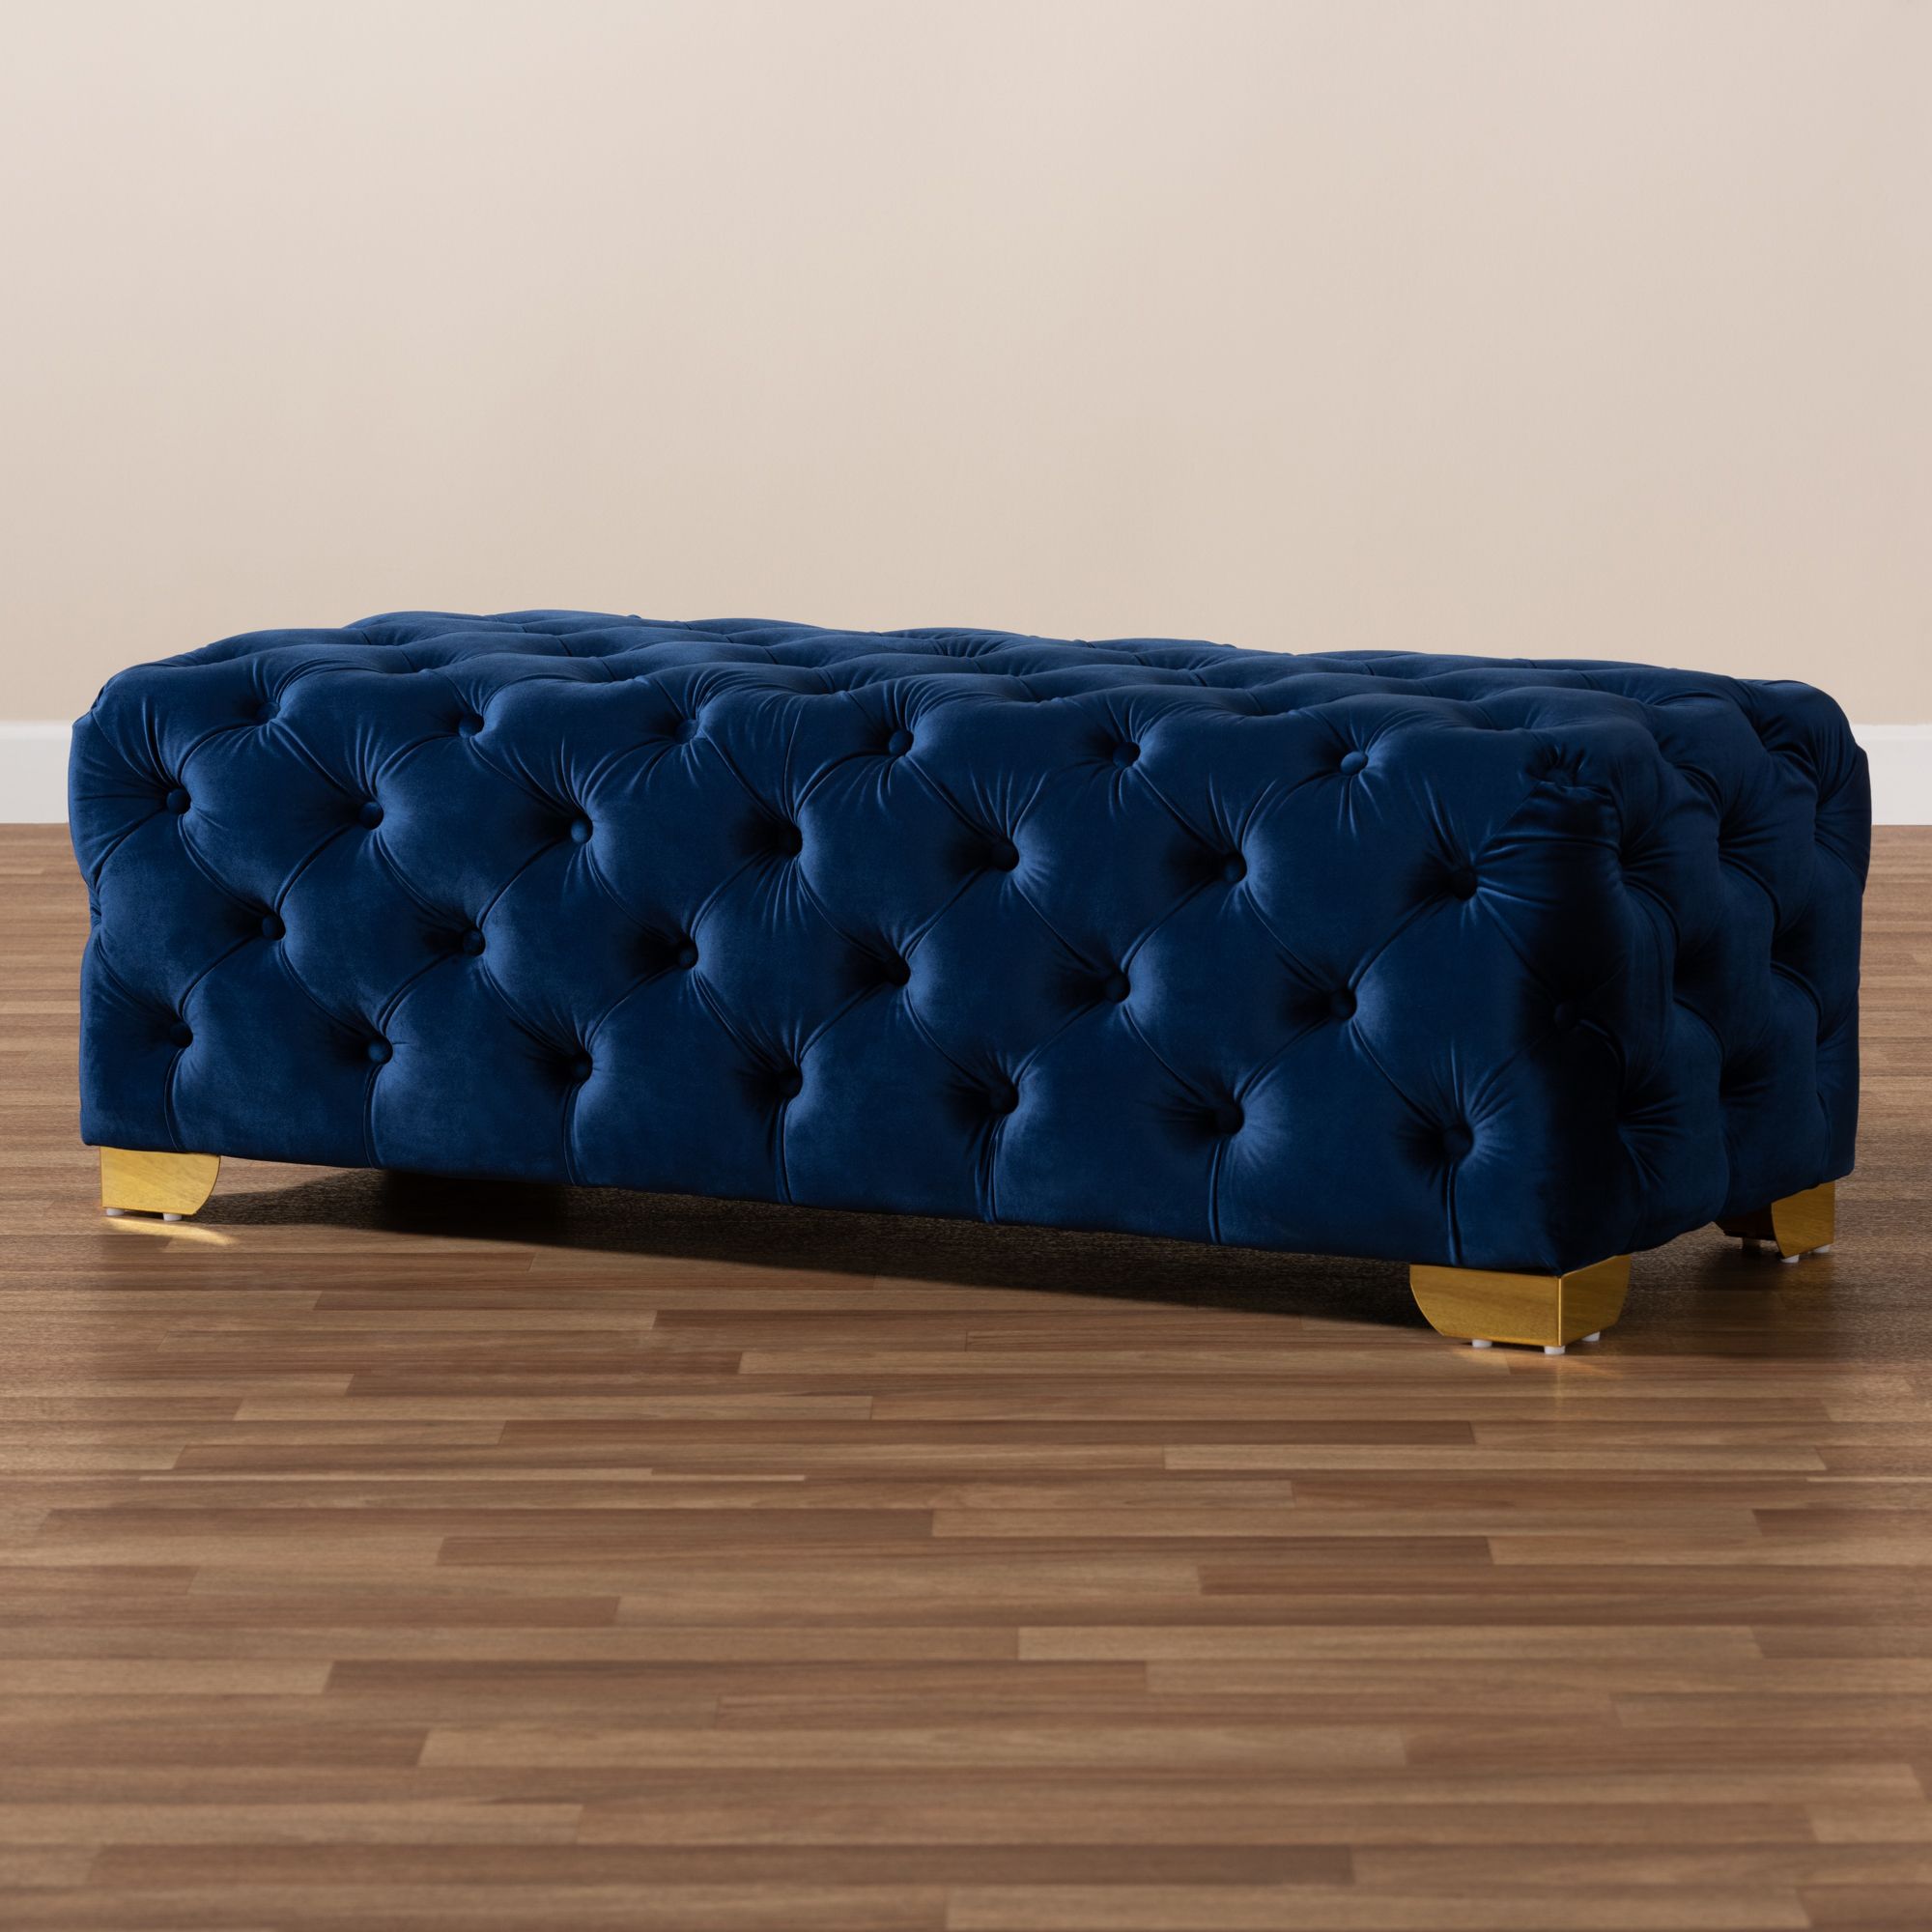 Avara Glam & Luxe Tufted Velvet Fabric Gold Finished Legs 48" Bench With Regard To Gold Chevron Velvet Fabric Ottomans (View 7 of 20)